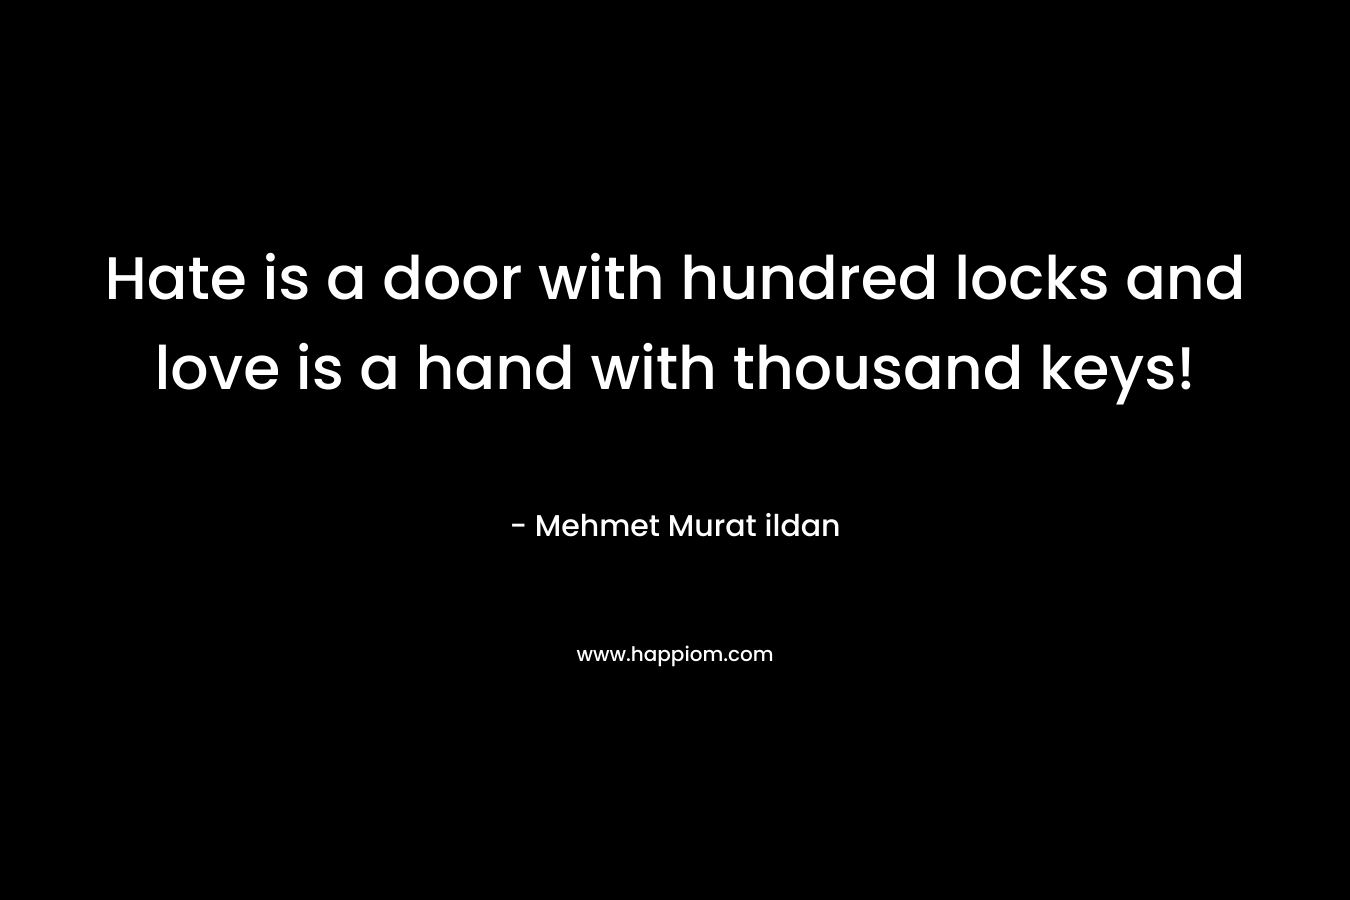 Hate is a door with hundred locks and love is a hand with thousand keys! – Mehmet Murat ildan